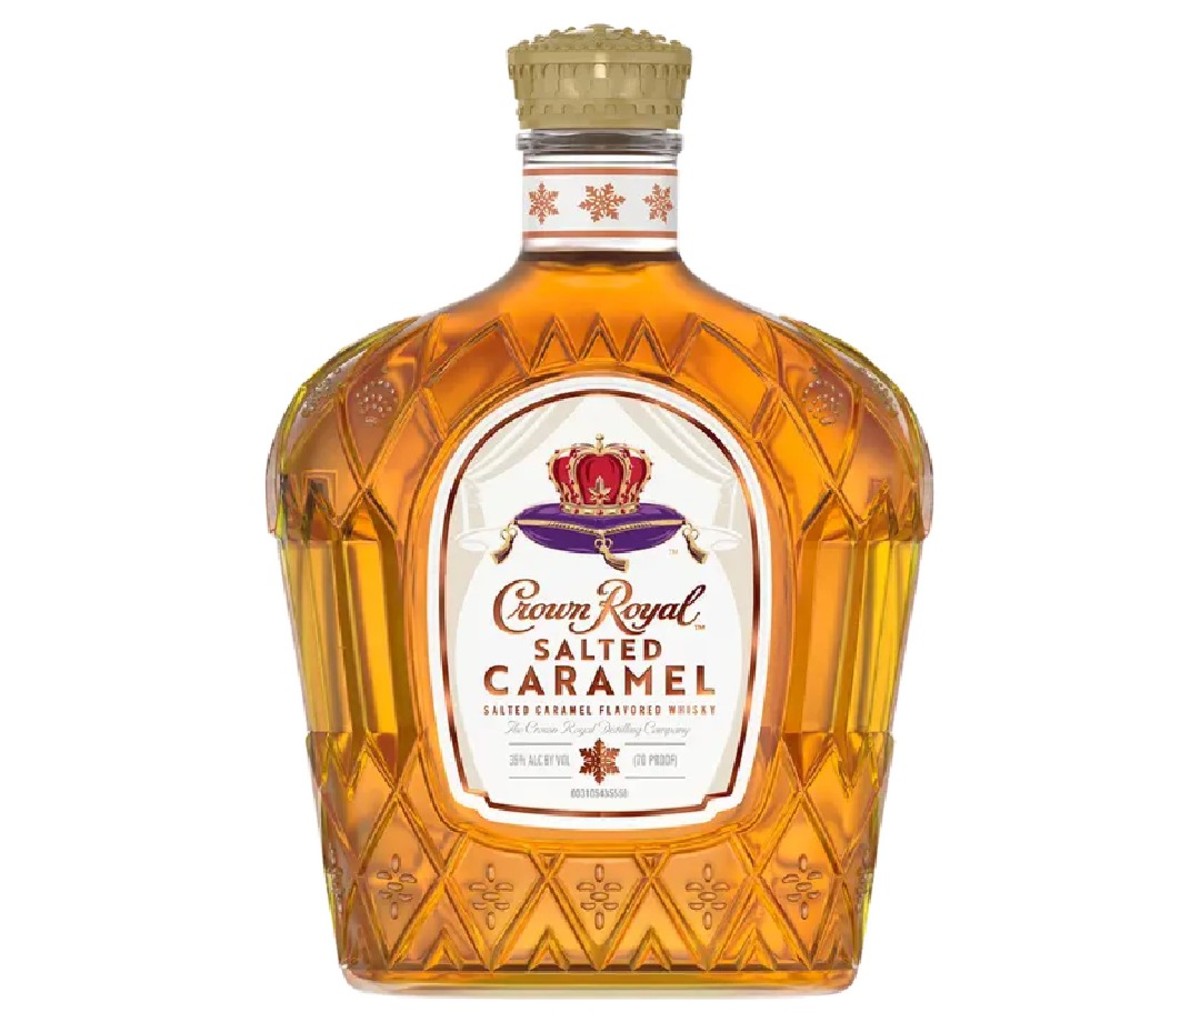 A bottle of Crown Royal Salted Caramel whiskey.